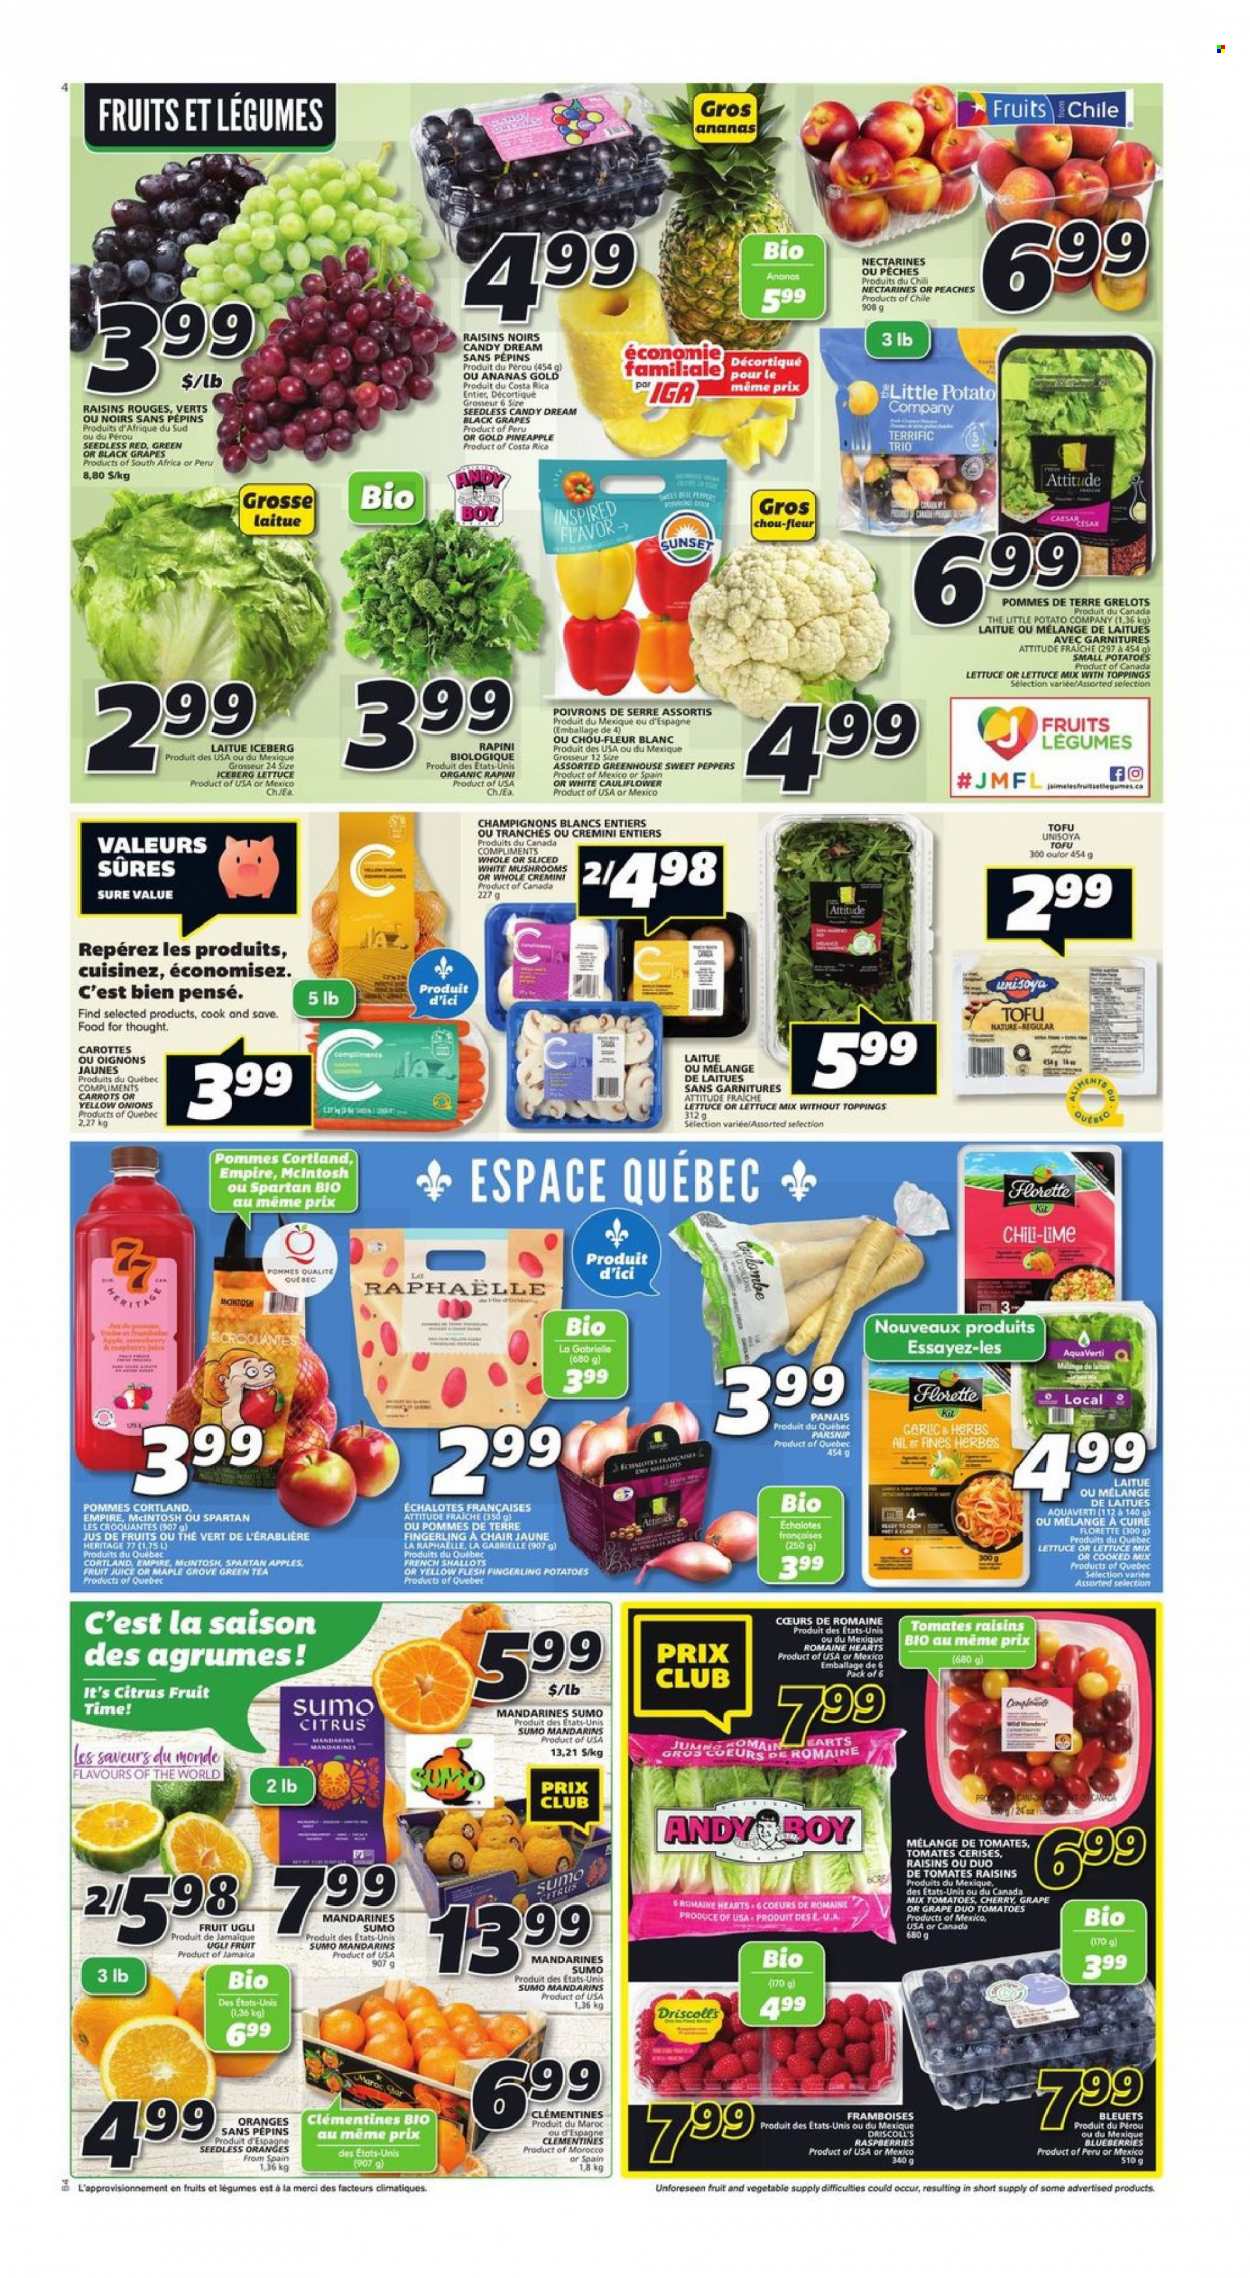 thumbnail - IGA Flyer - January 26, 2023 - February 01, 2023 - Sales products - mushrooms, bell peppers, carrots, cauliflower, shallots, sweet peppers, potatoes, parsnips, onion, lettuce, peppers, apples, blueberries, clementines, mandarines, nectarines, pineapple, oranges, peaches, sumo citrus, tofu, Merci, dried fruit, juice, fruit juice, green tea, tea, raisins. Page 3.